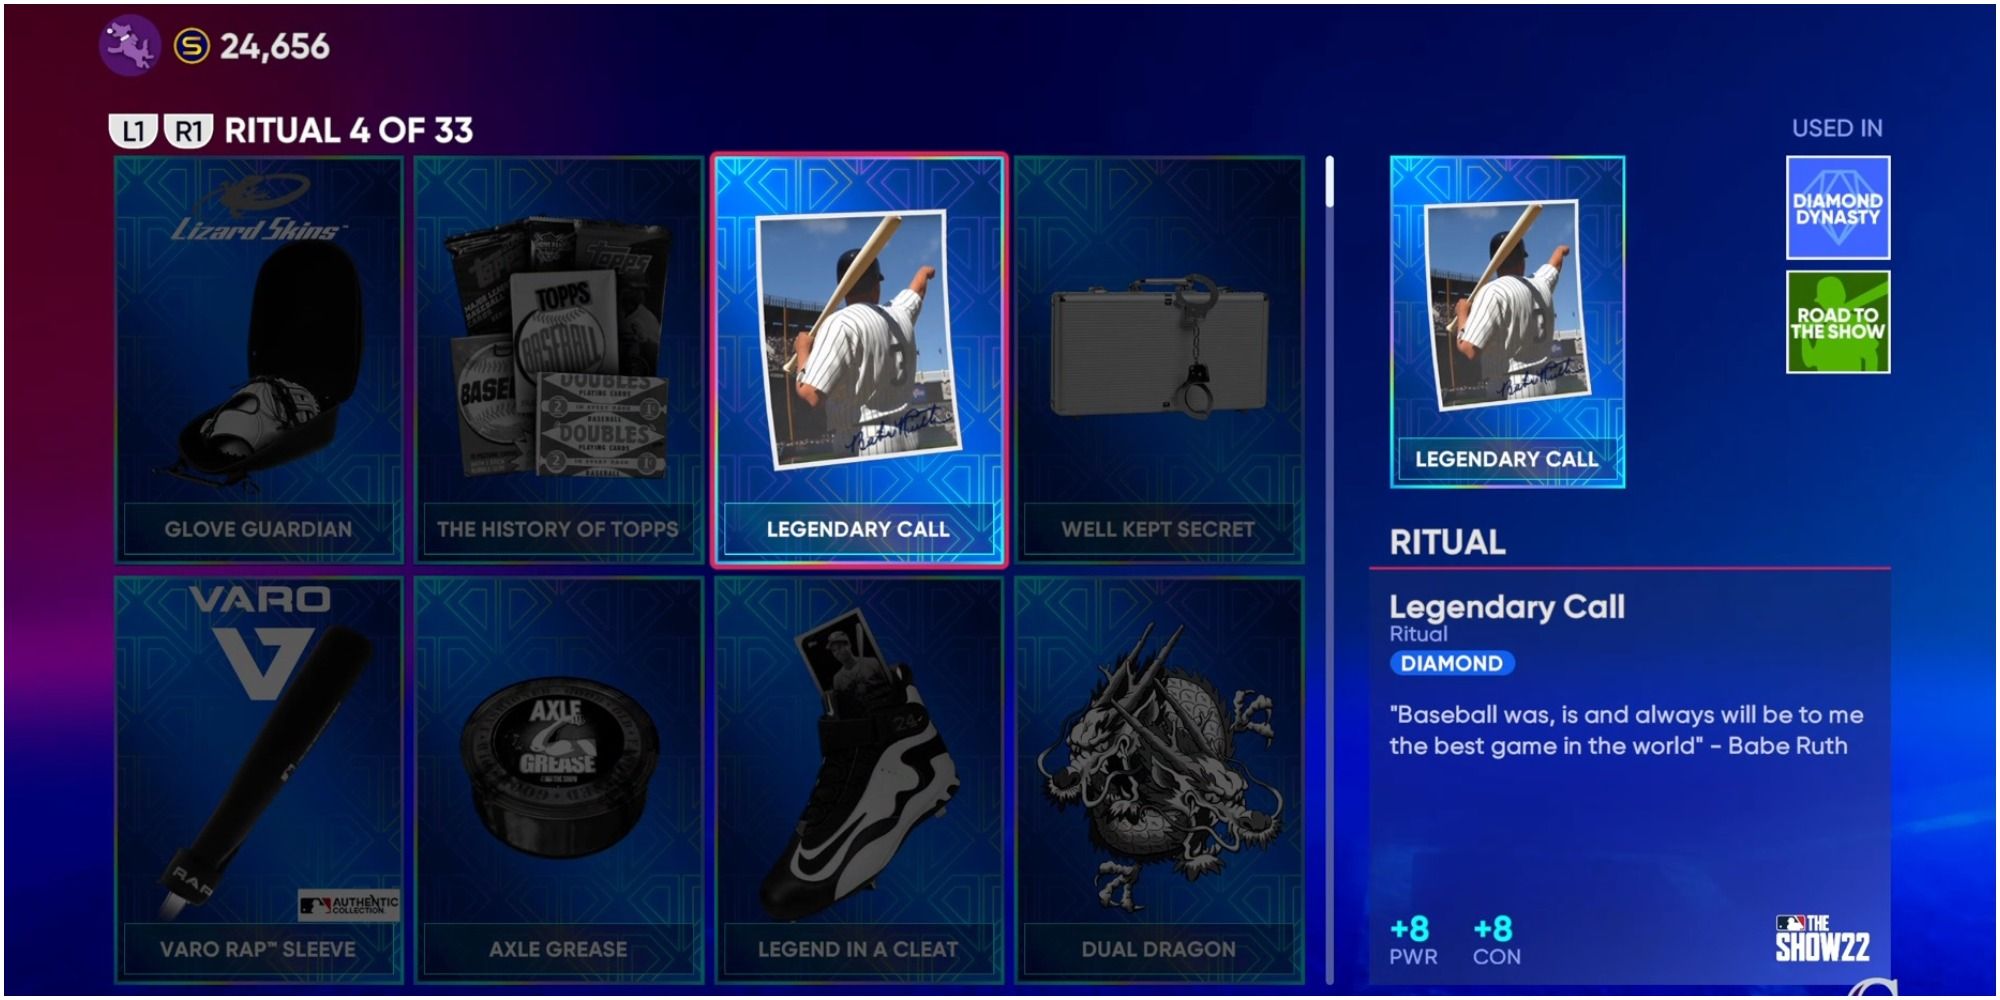 MLB The Show 22 Equipping The Legendary Call Ritual